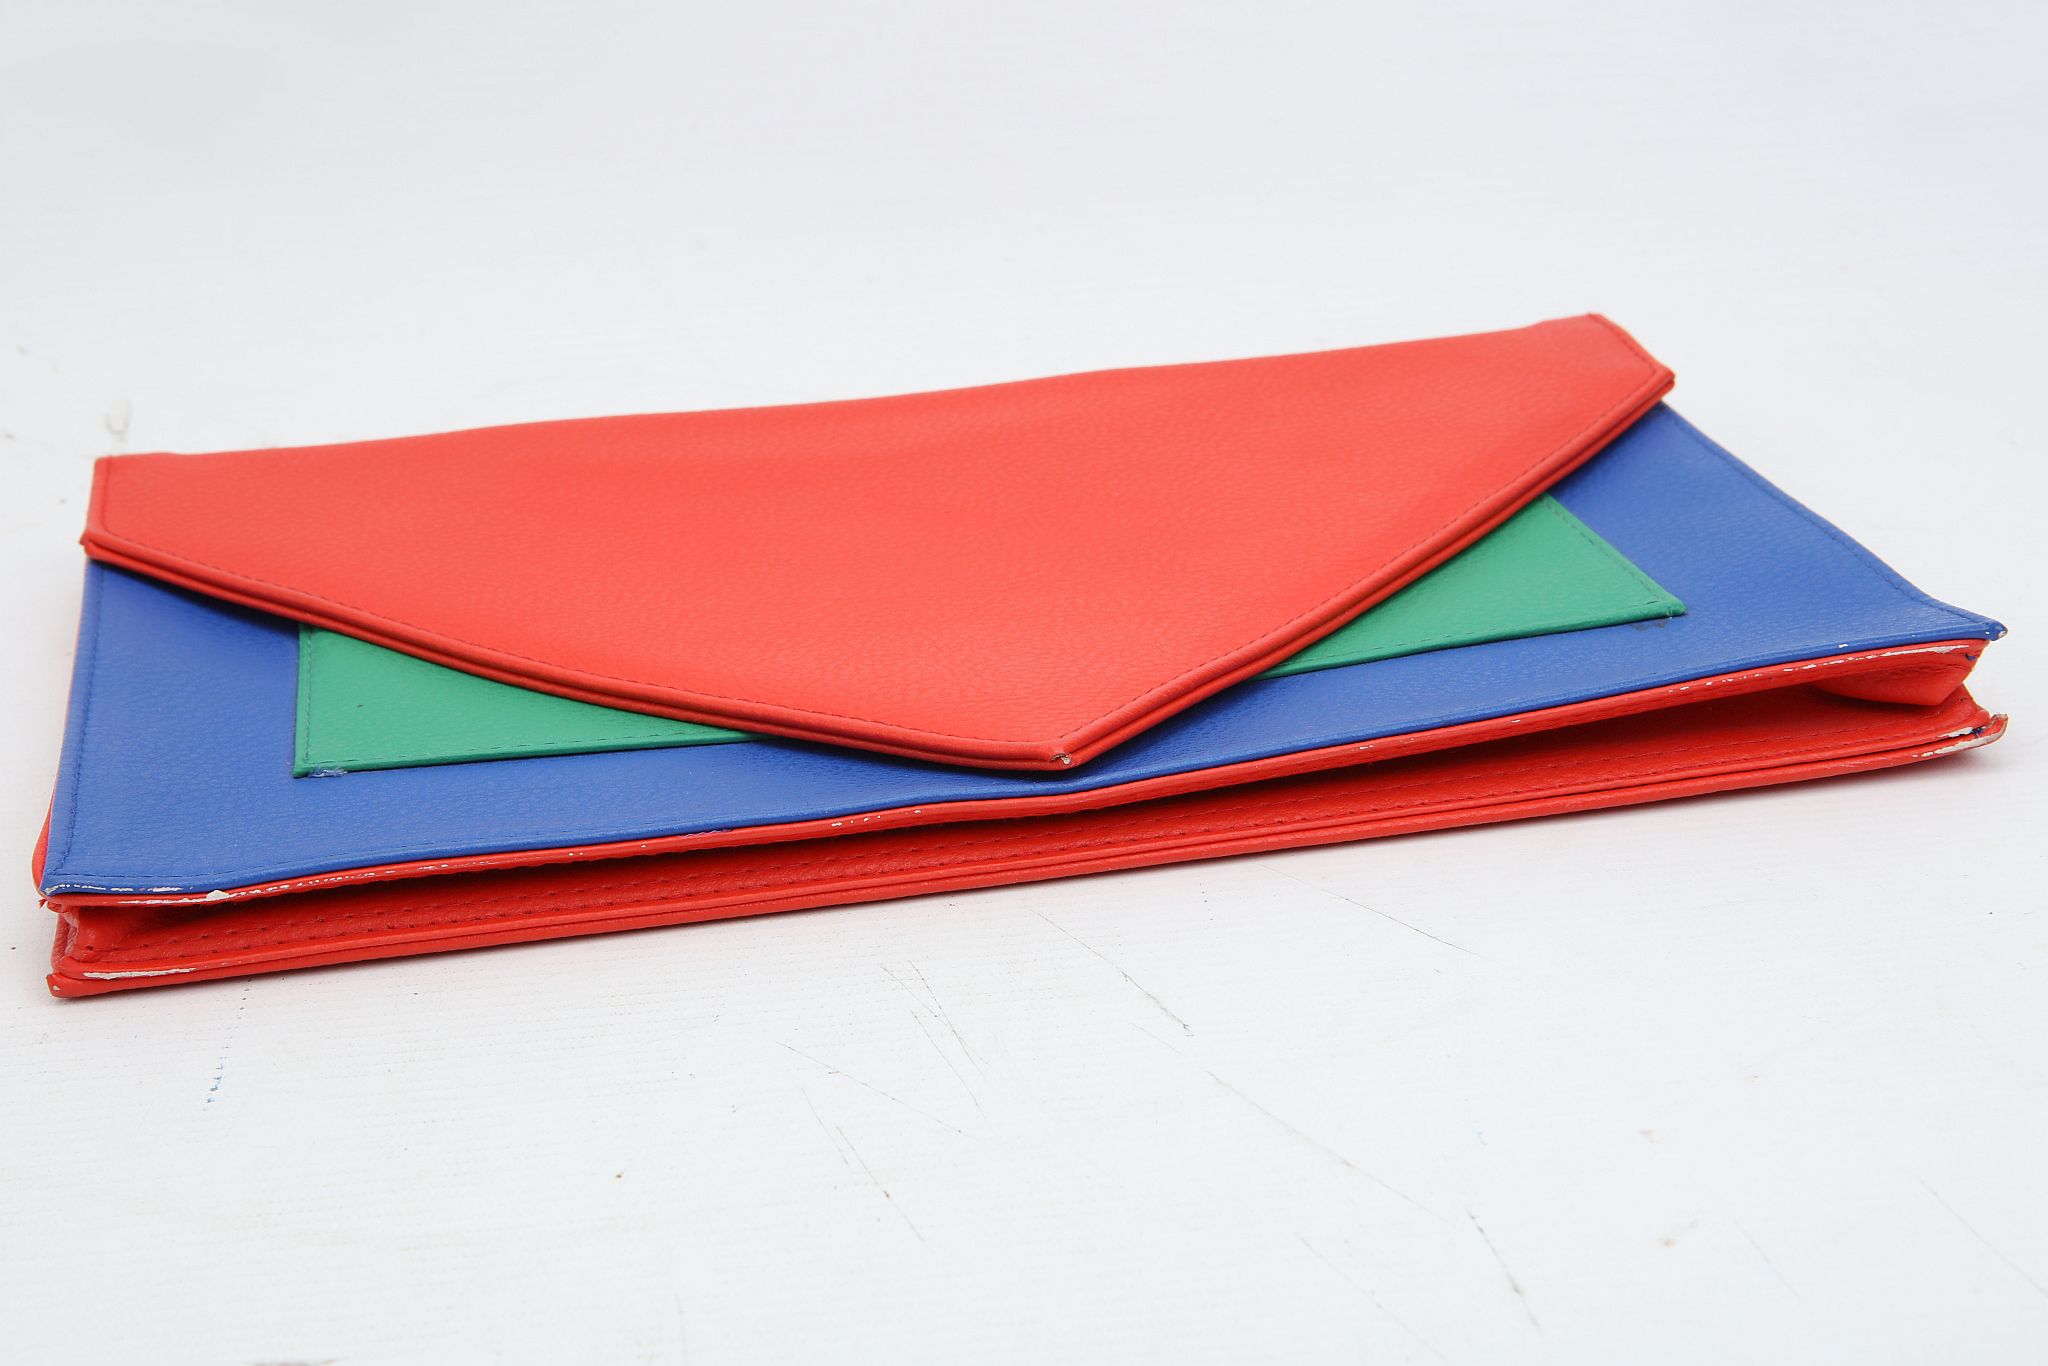 TWO 1980s CLUTCH BAGS, one red Louis Feraud example, the other Ivorie de Balmain multicoloured - Image 11 of 26